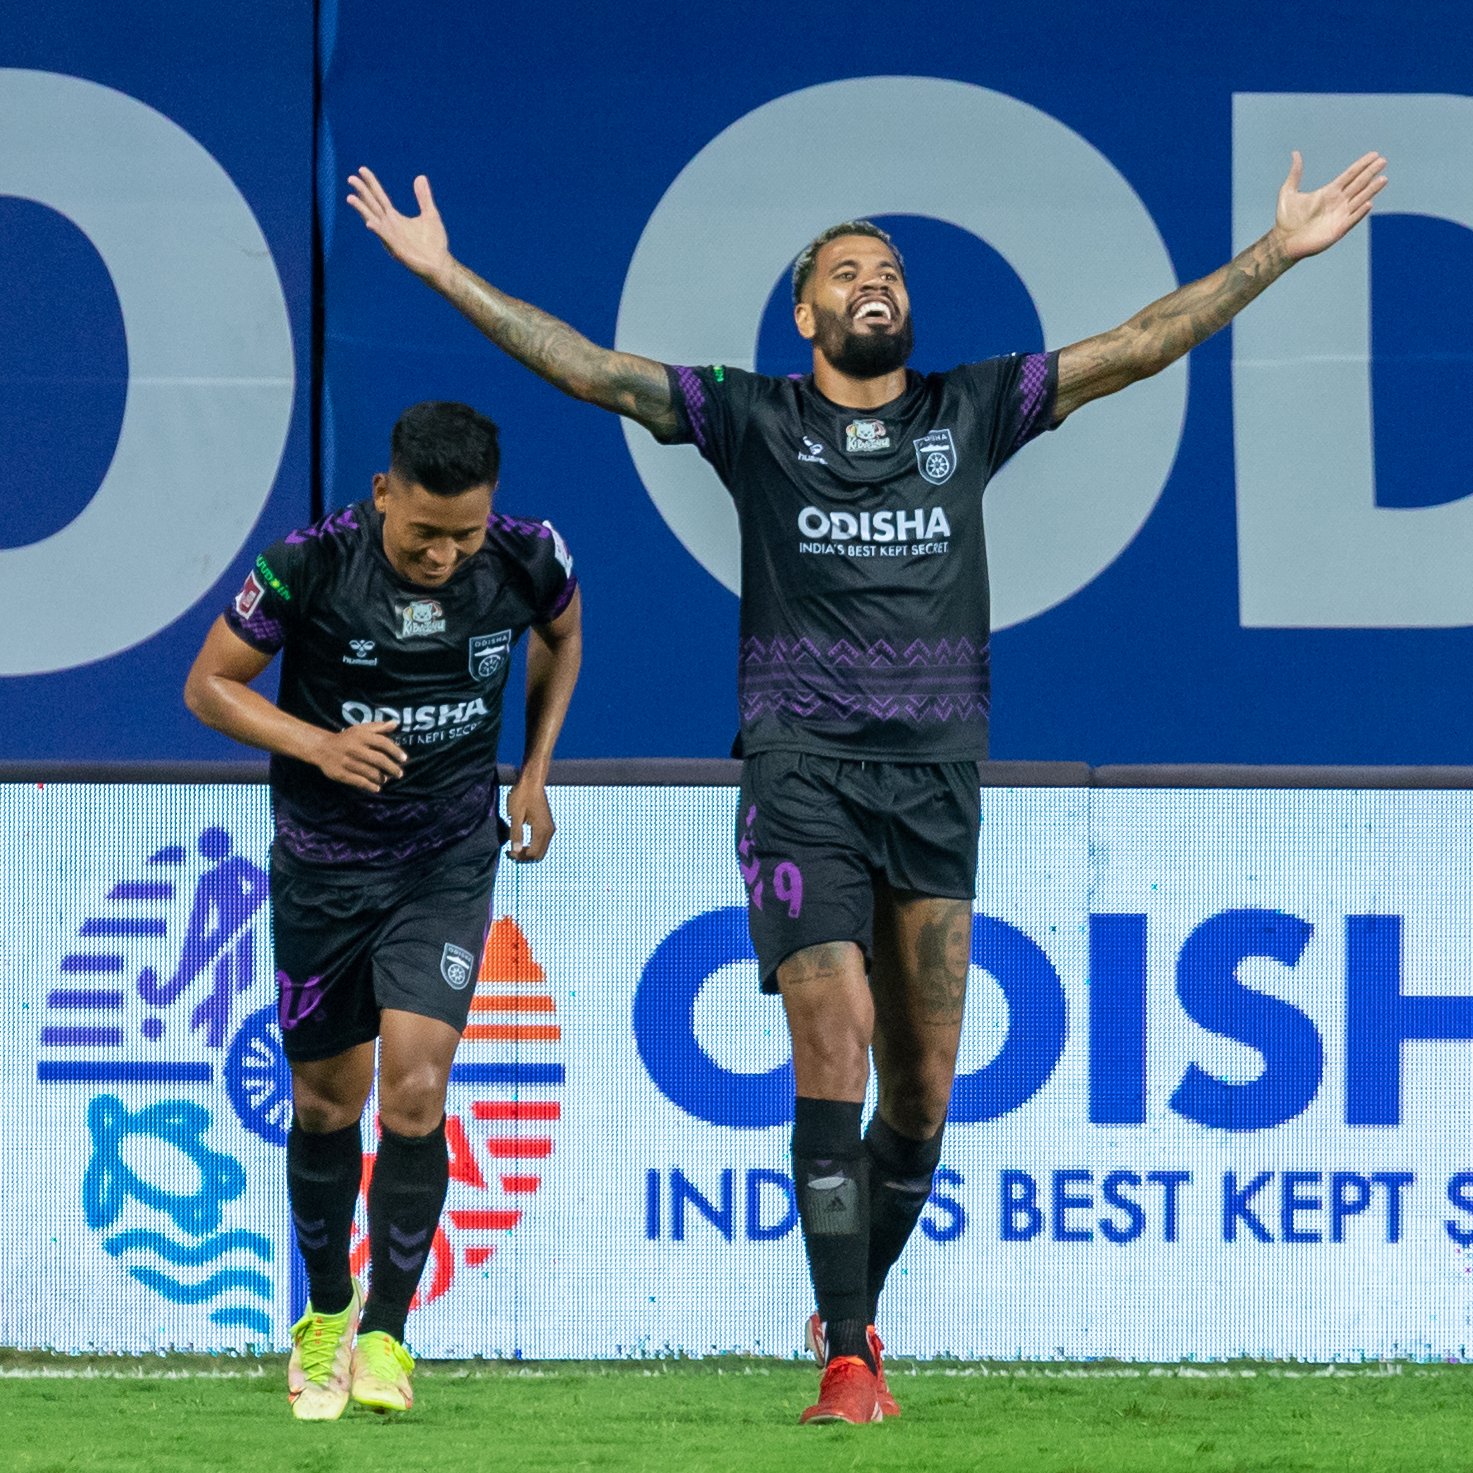 OFC 2-2 CFC Highlights: A goal-fest comes to an end as Odisha FC vs Chennaiyin FC ends in a draw; Javier Hernandez and Rahim Ali were amongst the scorers